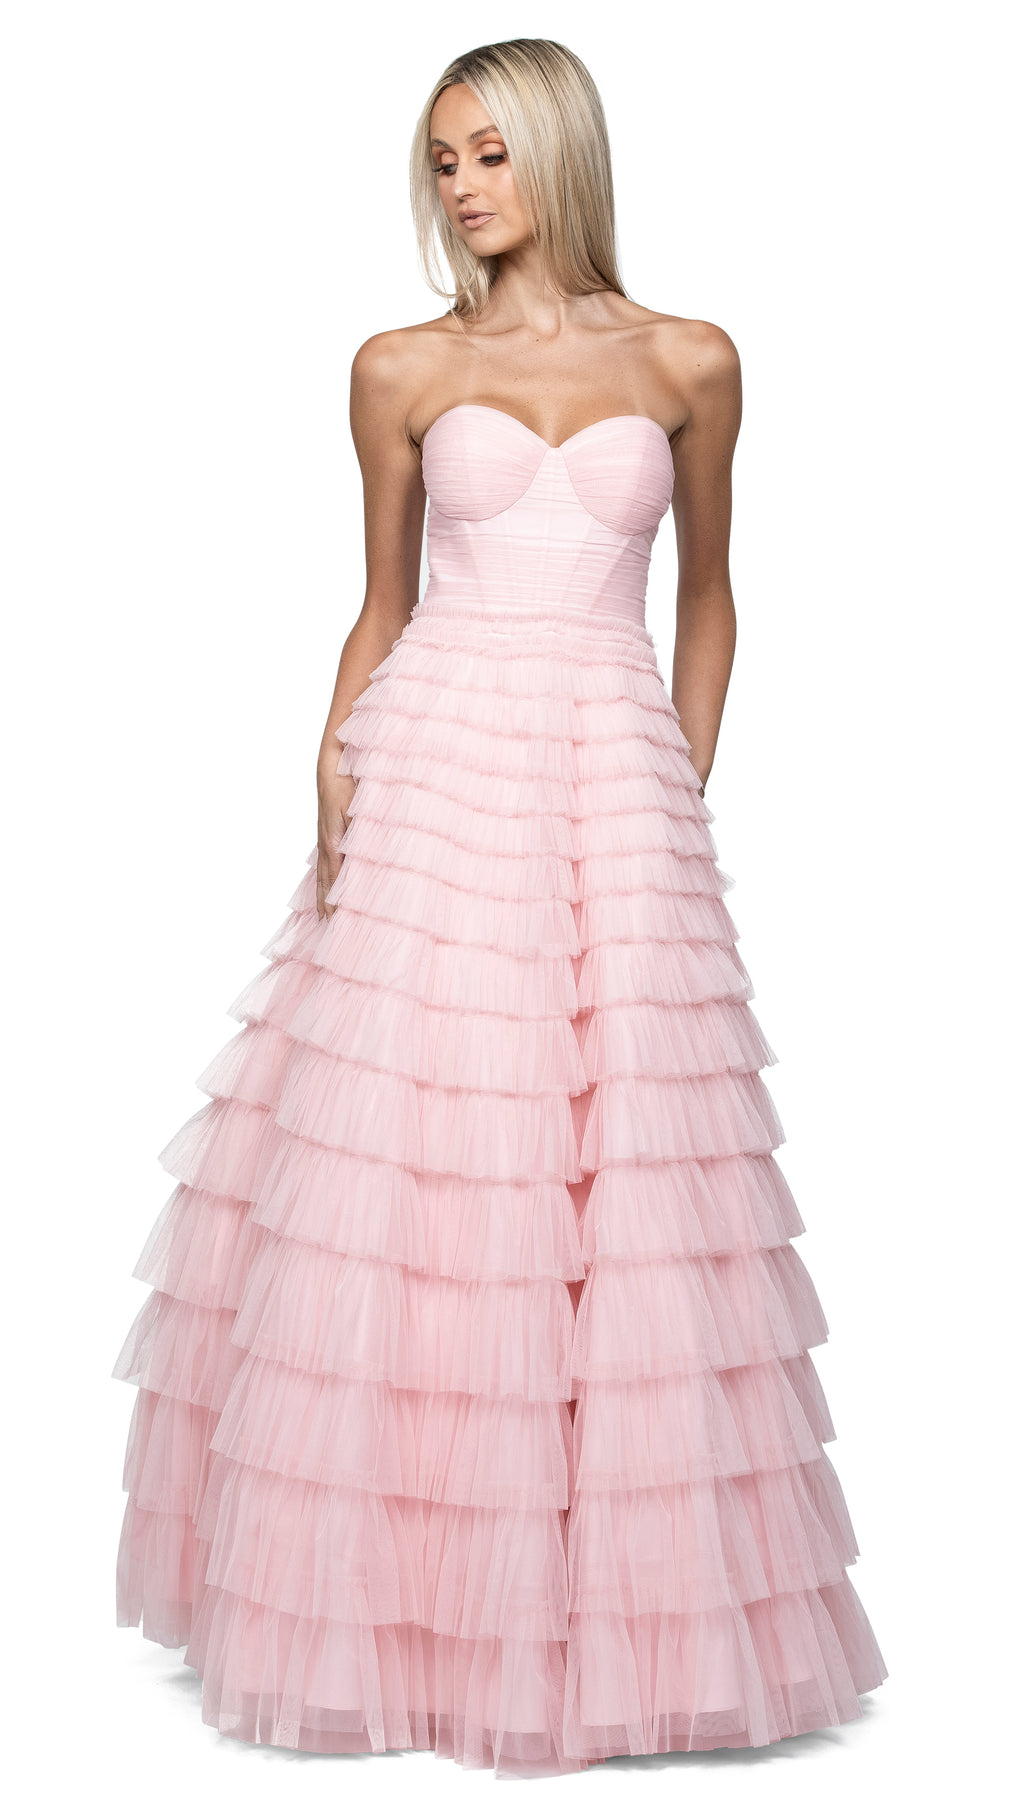 Serenity Sweetheart Strapless Ball Gown in Soft Pink